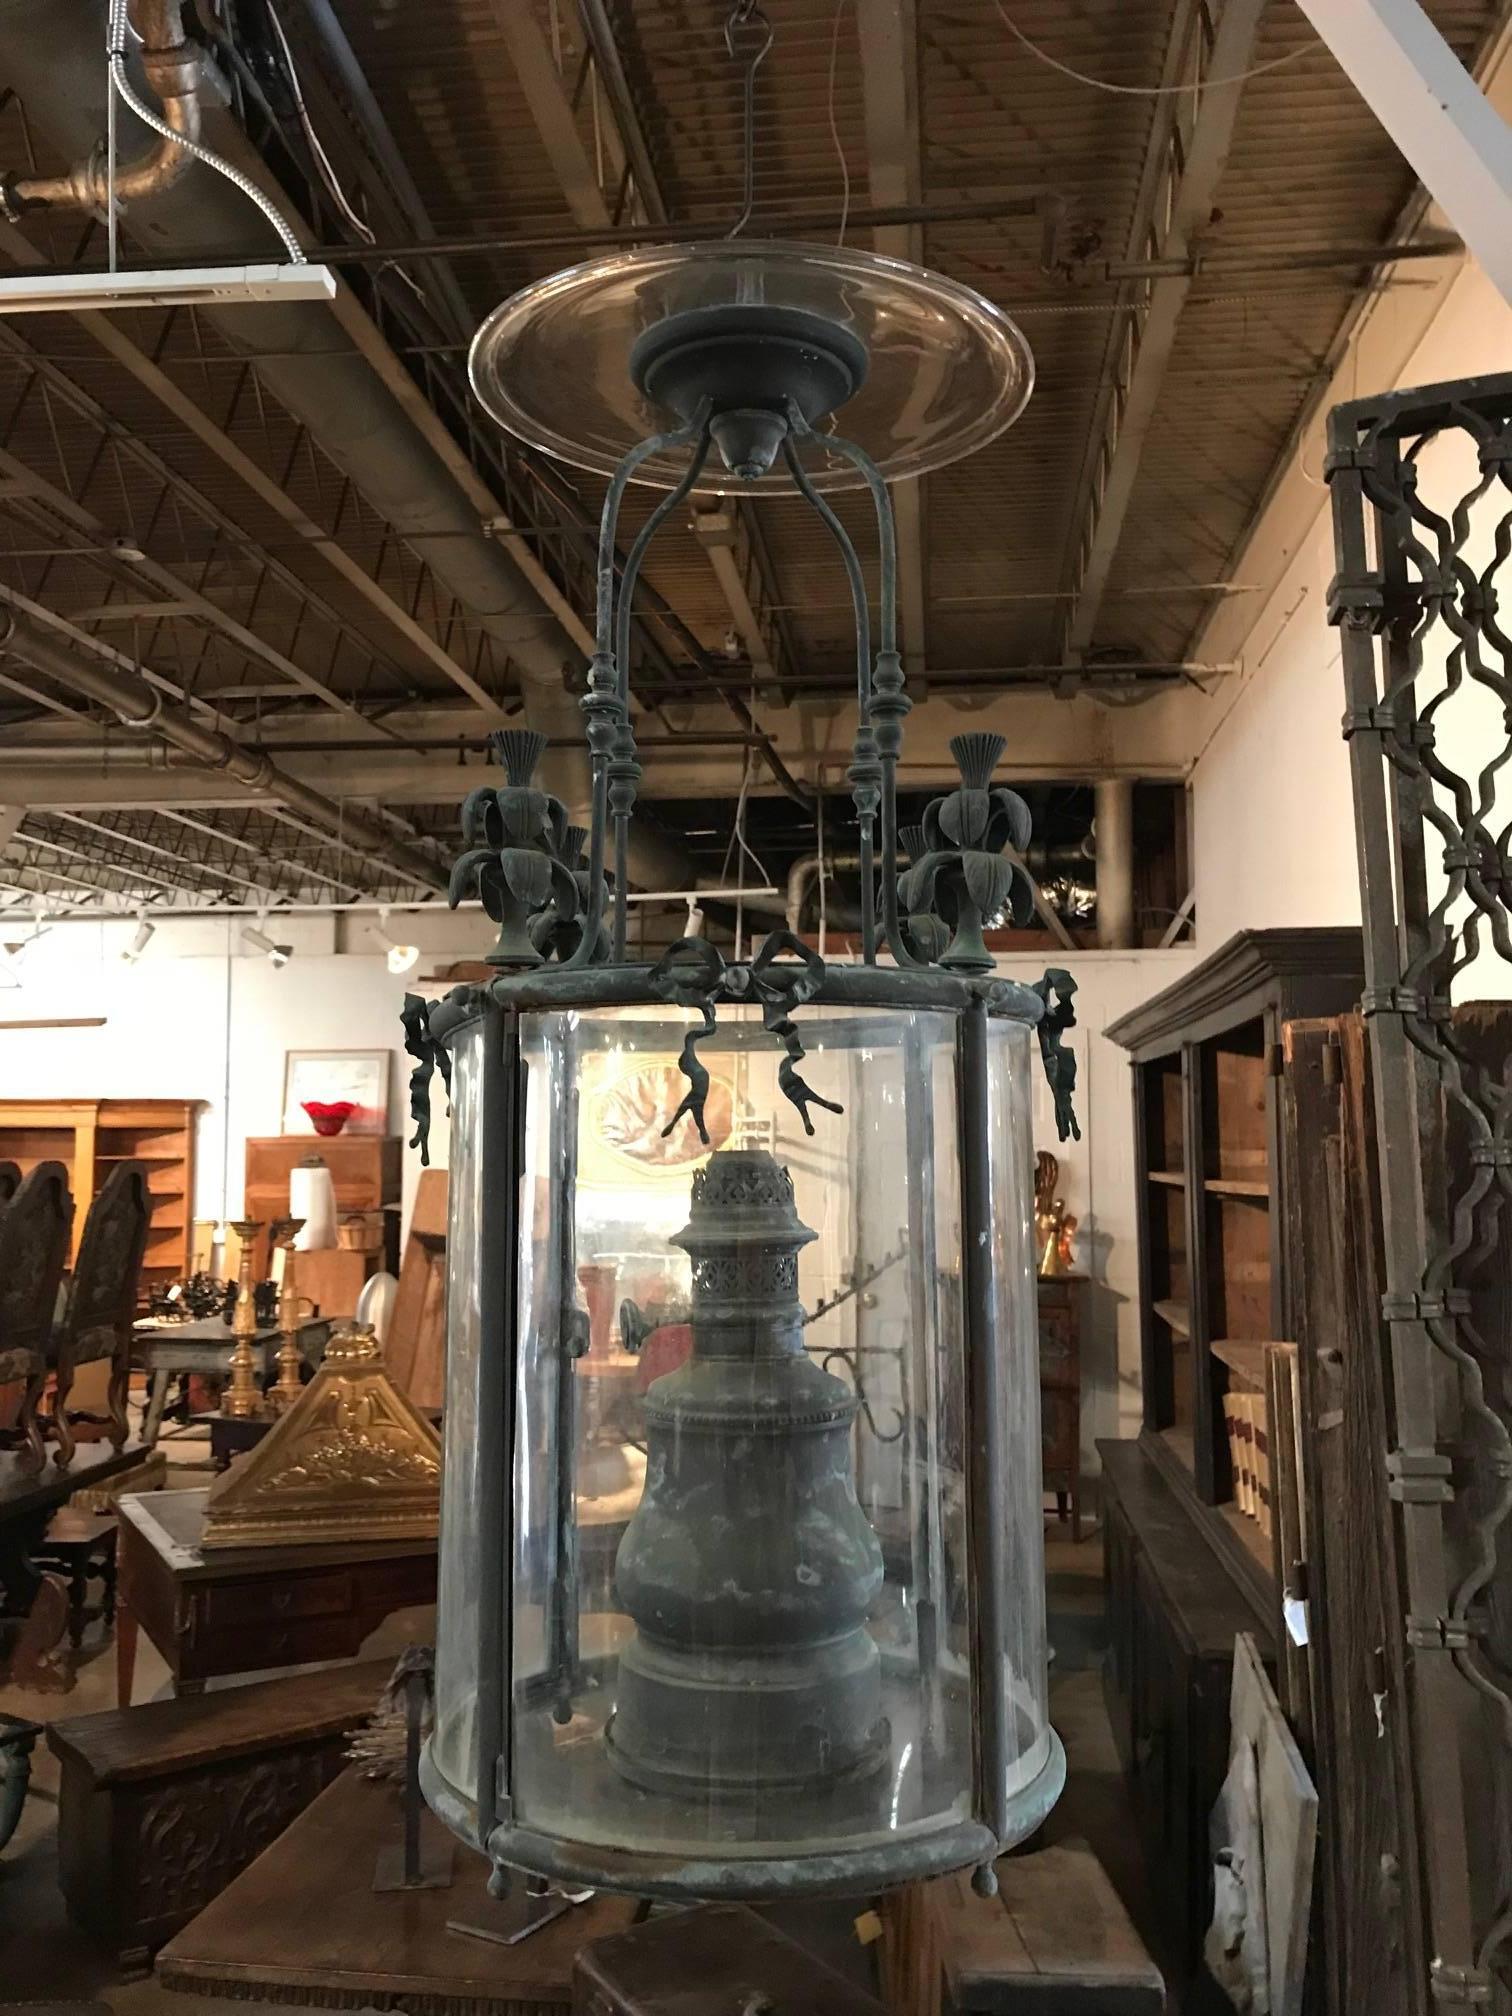 An outstanding and sensational French mid-19th century lantern. Wonderfully crafted from bronze, copper and glass. The lantern is in exceptional condition, even retaining its upper glass reflector plate. A stunning fixture for any entryway or